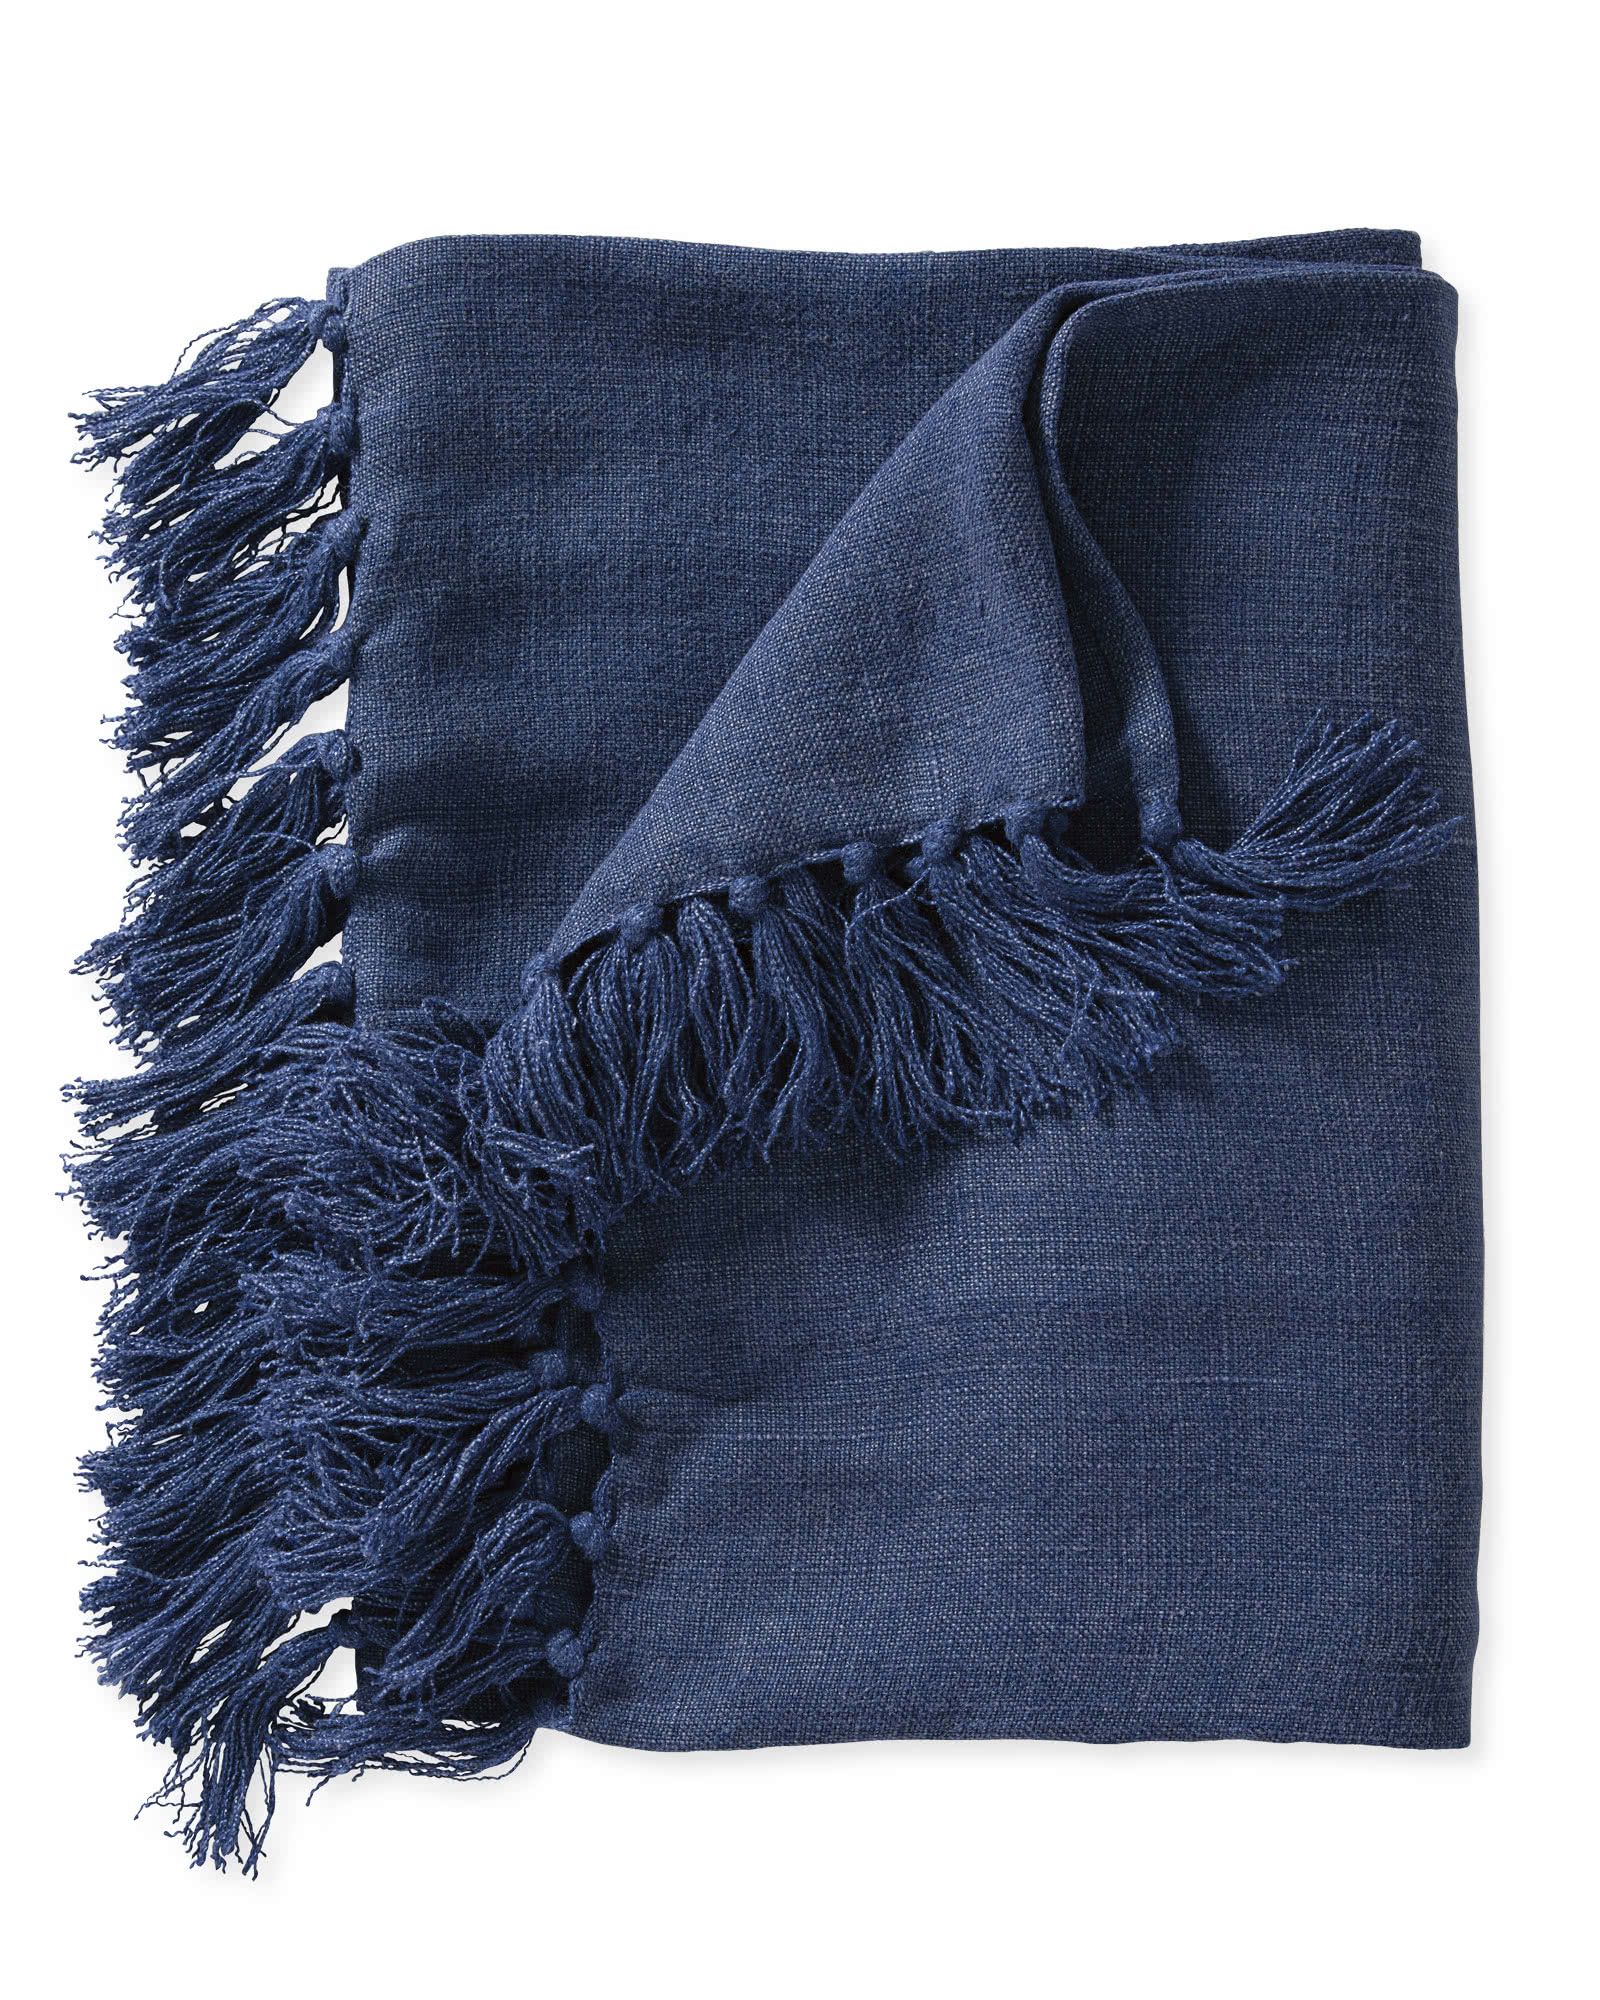 Mendocino Linen Throw
        THR62-01 | Serena and Lily